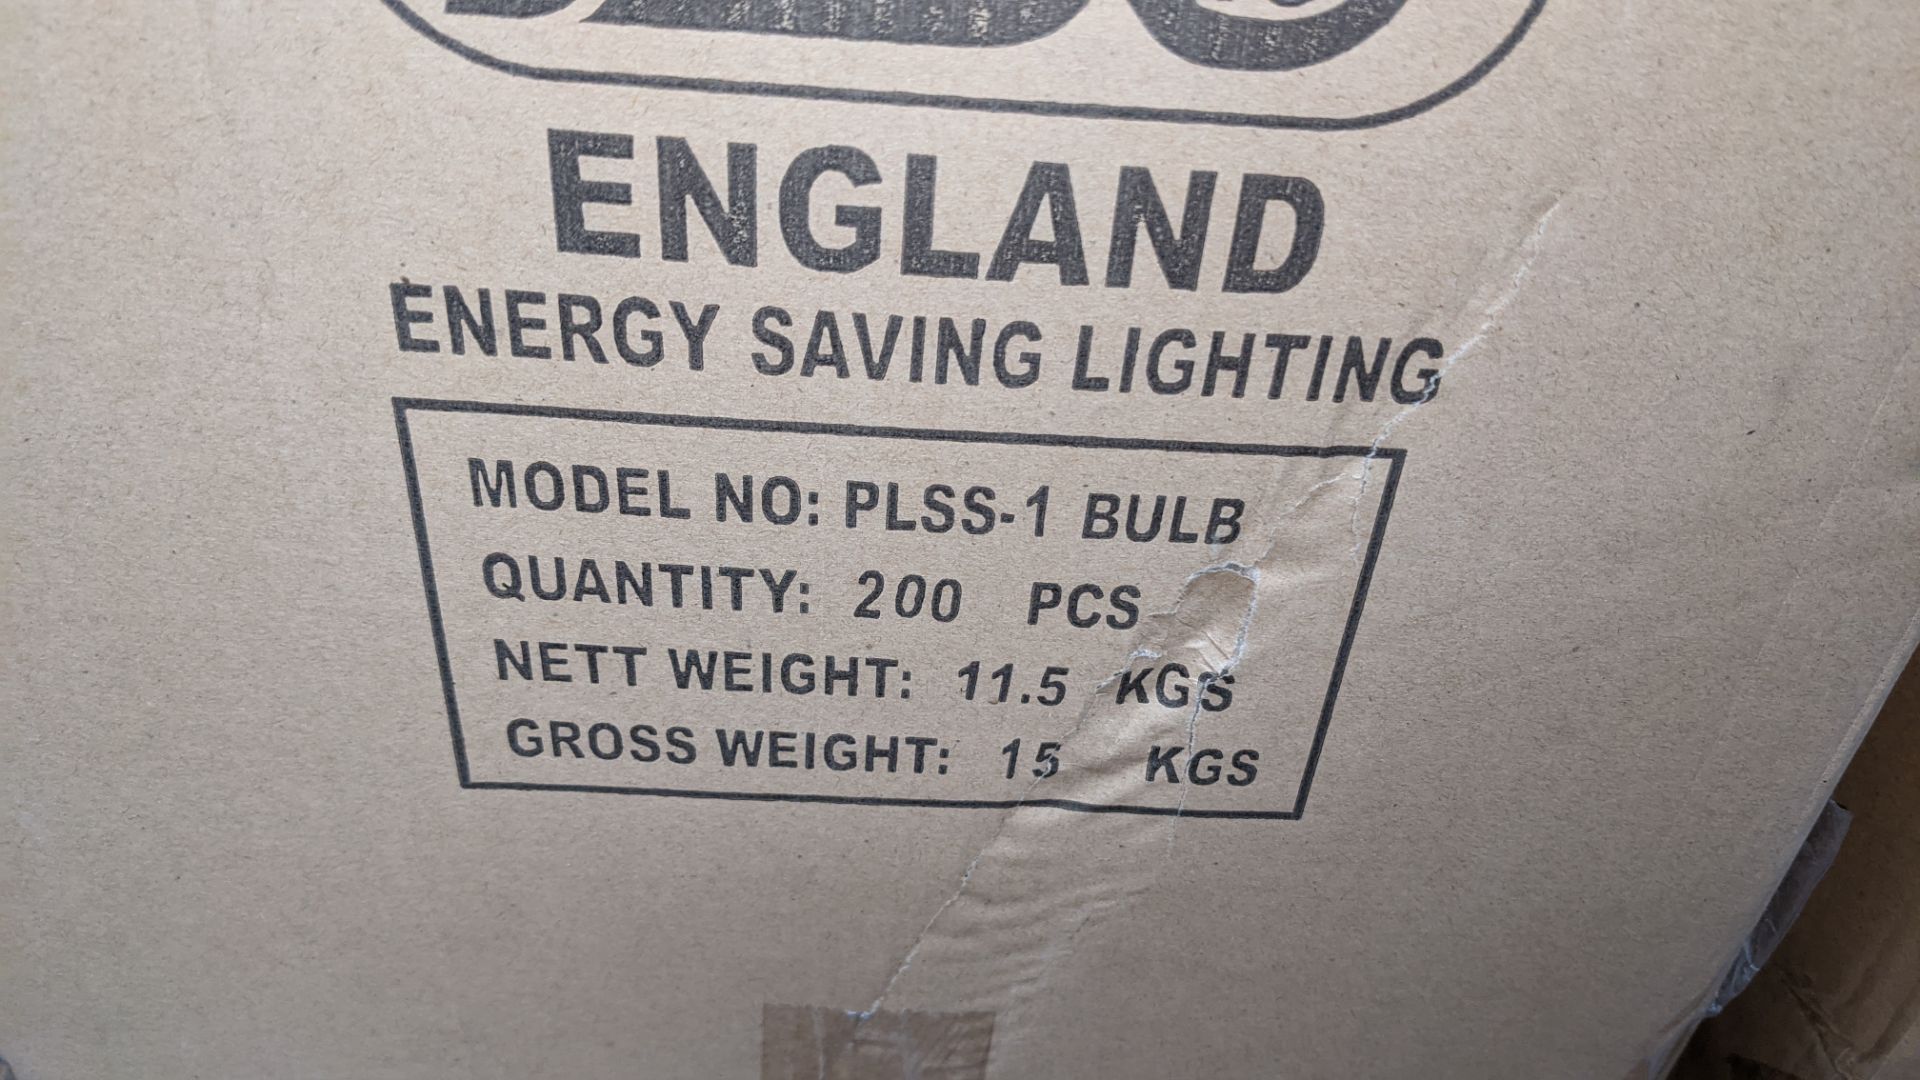 PLSS-1 energy saving bulbs - this lot consists of one carton containing 200 bulbs - Image 2 of 2